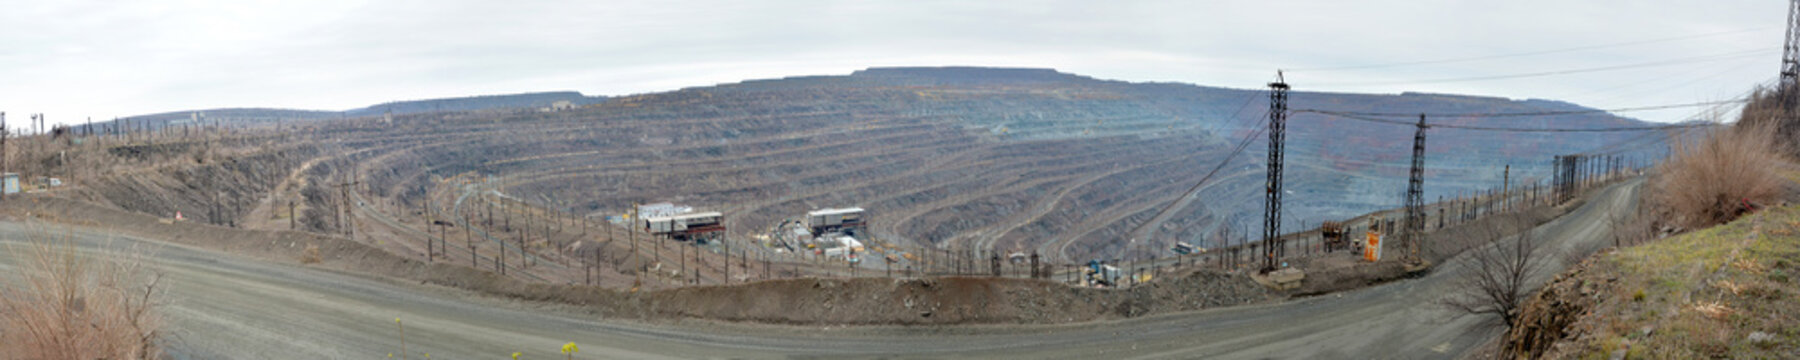 View of the huge mining